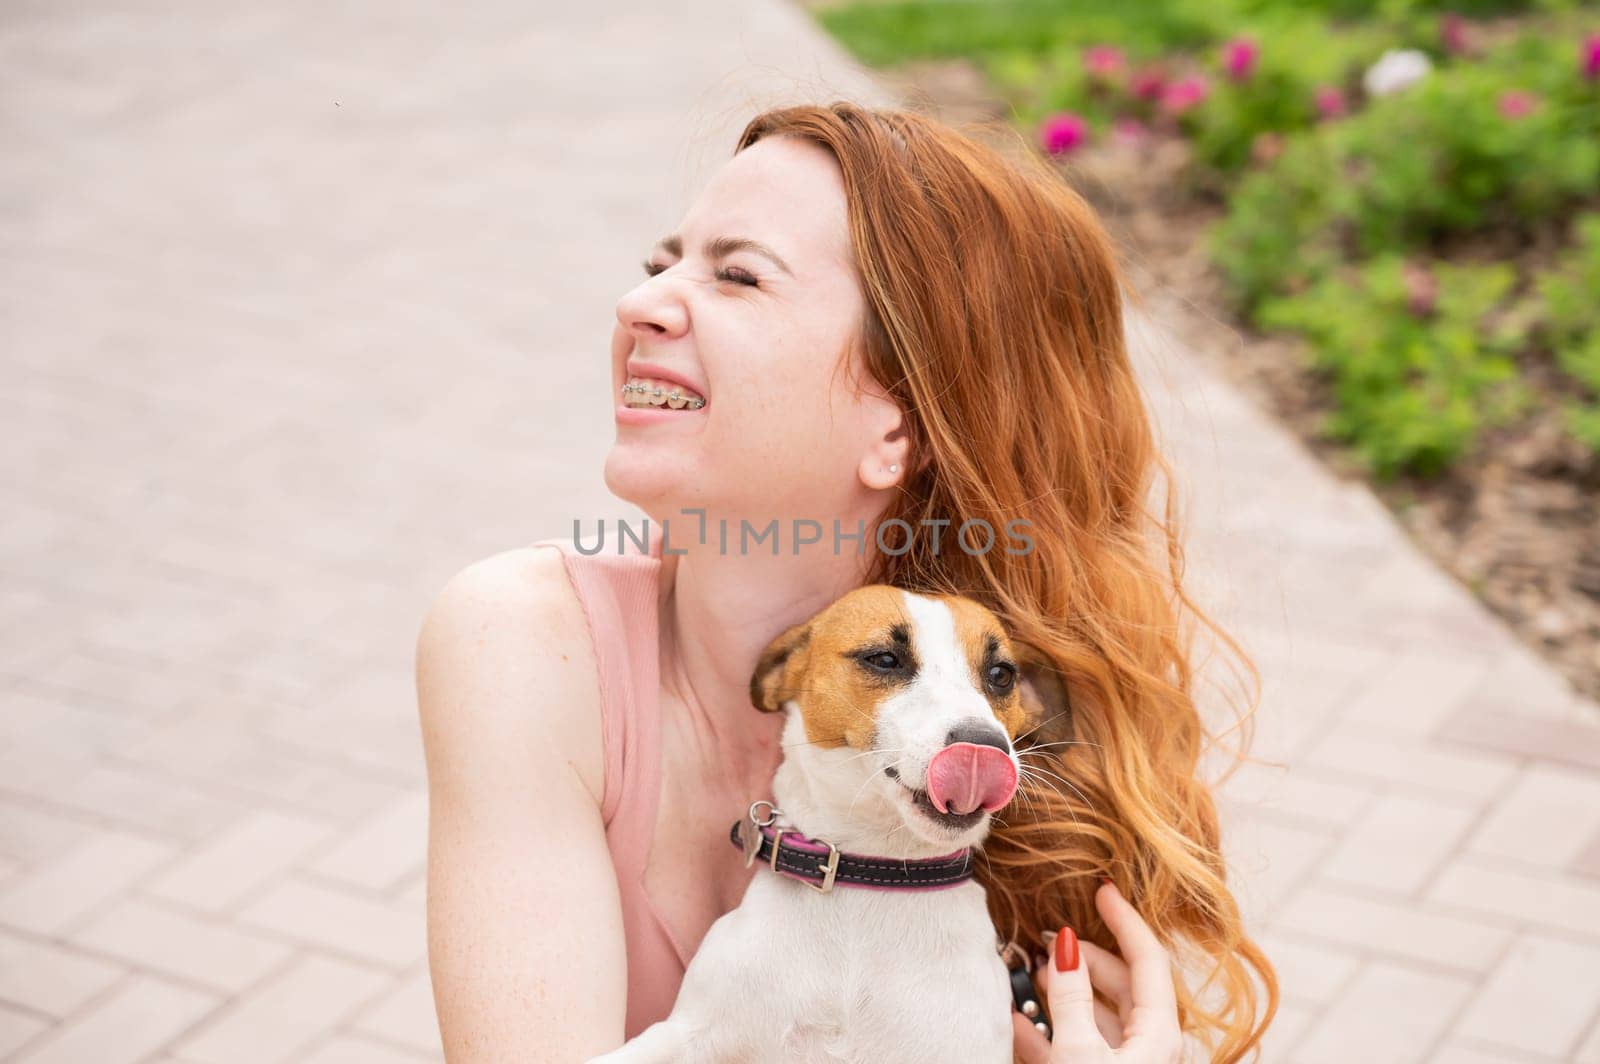 Dog jack russell terrier licks the owner in the face outdoors. Girl with braces on her teeth